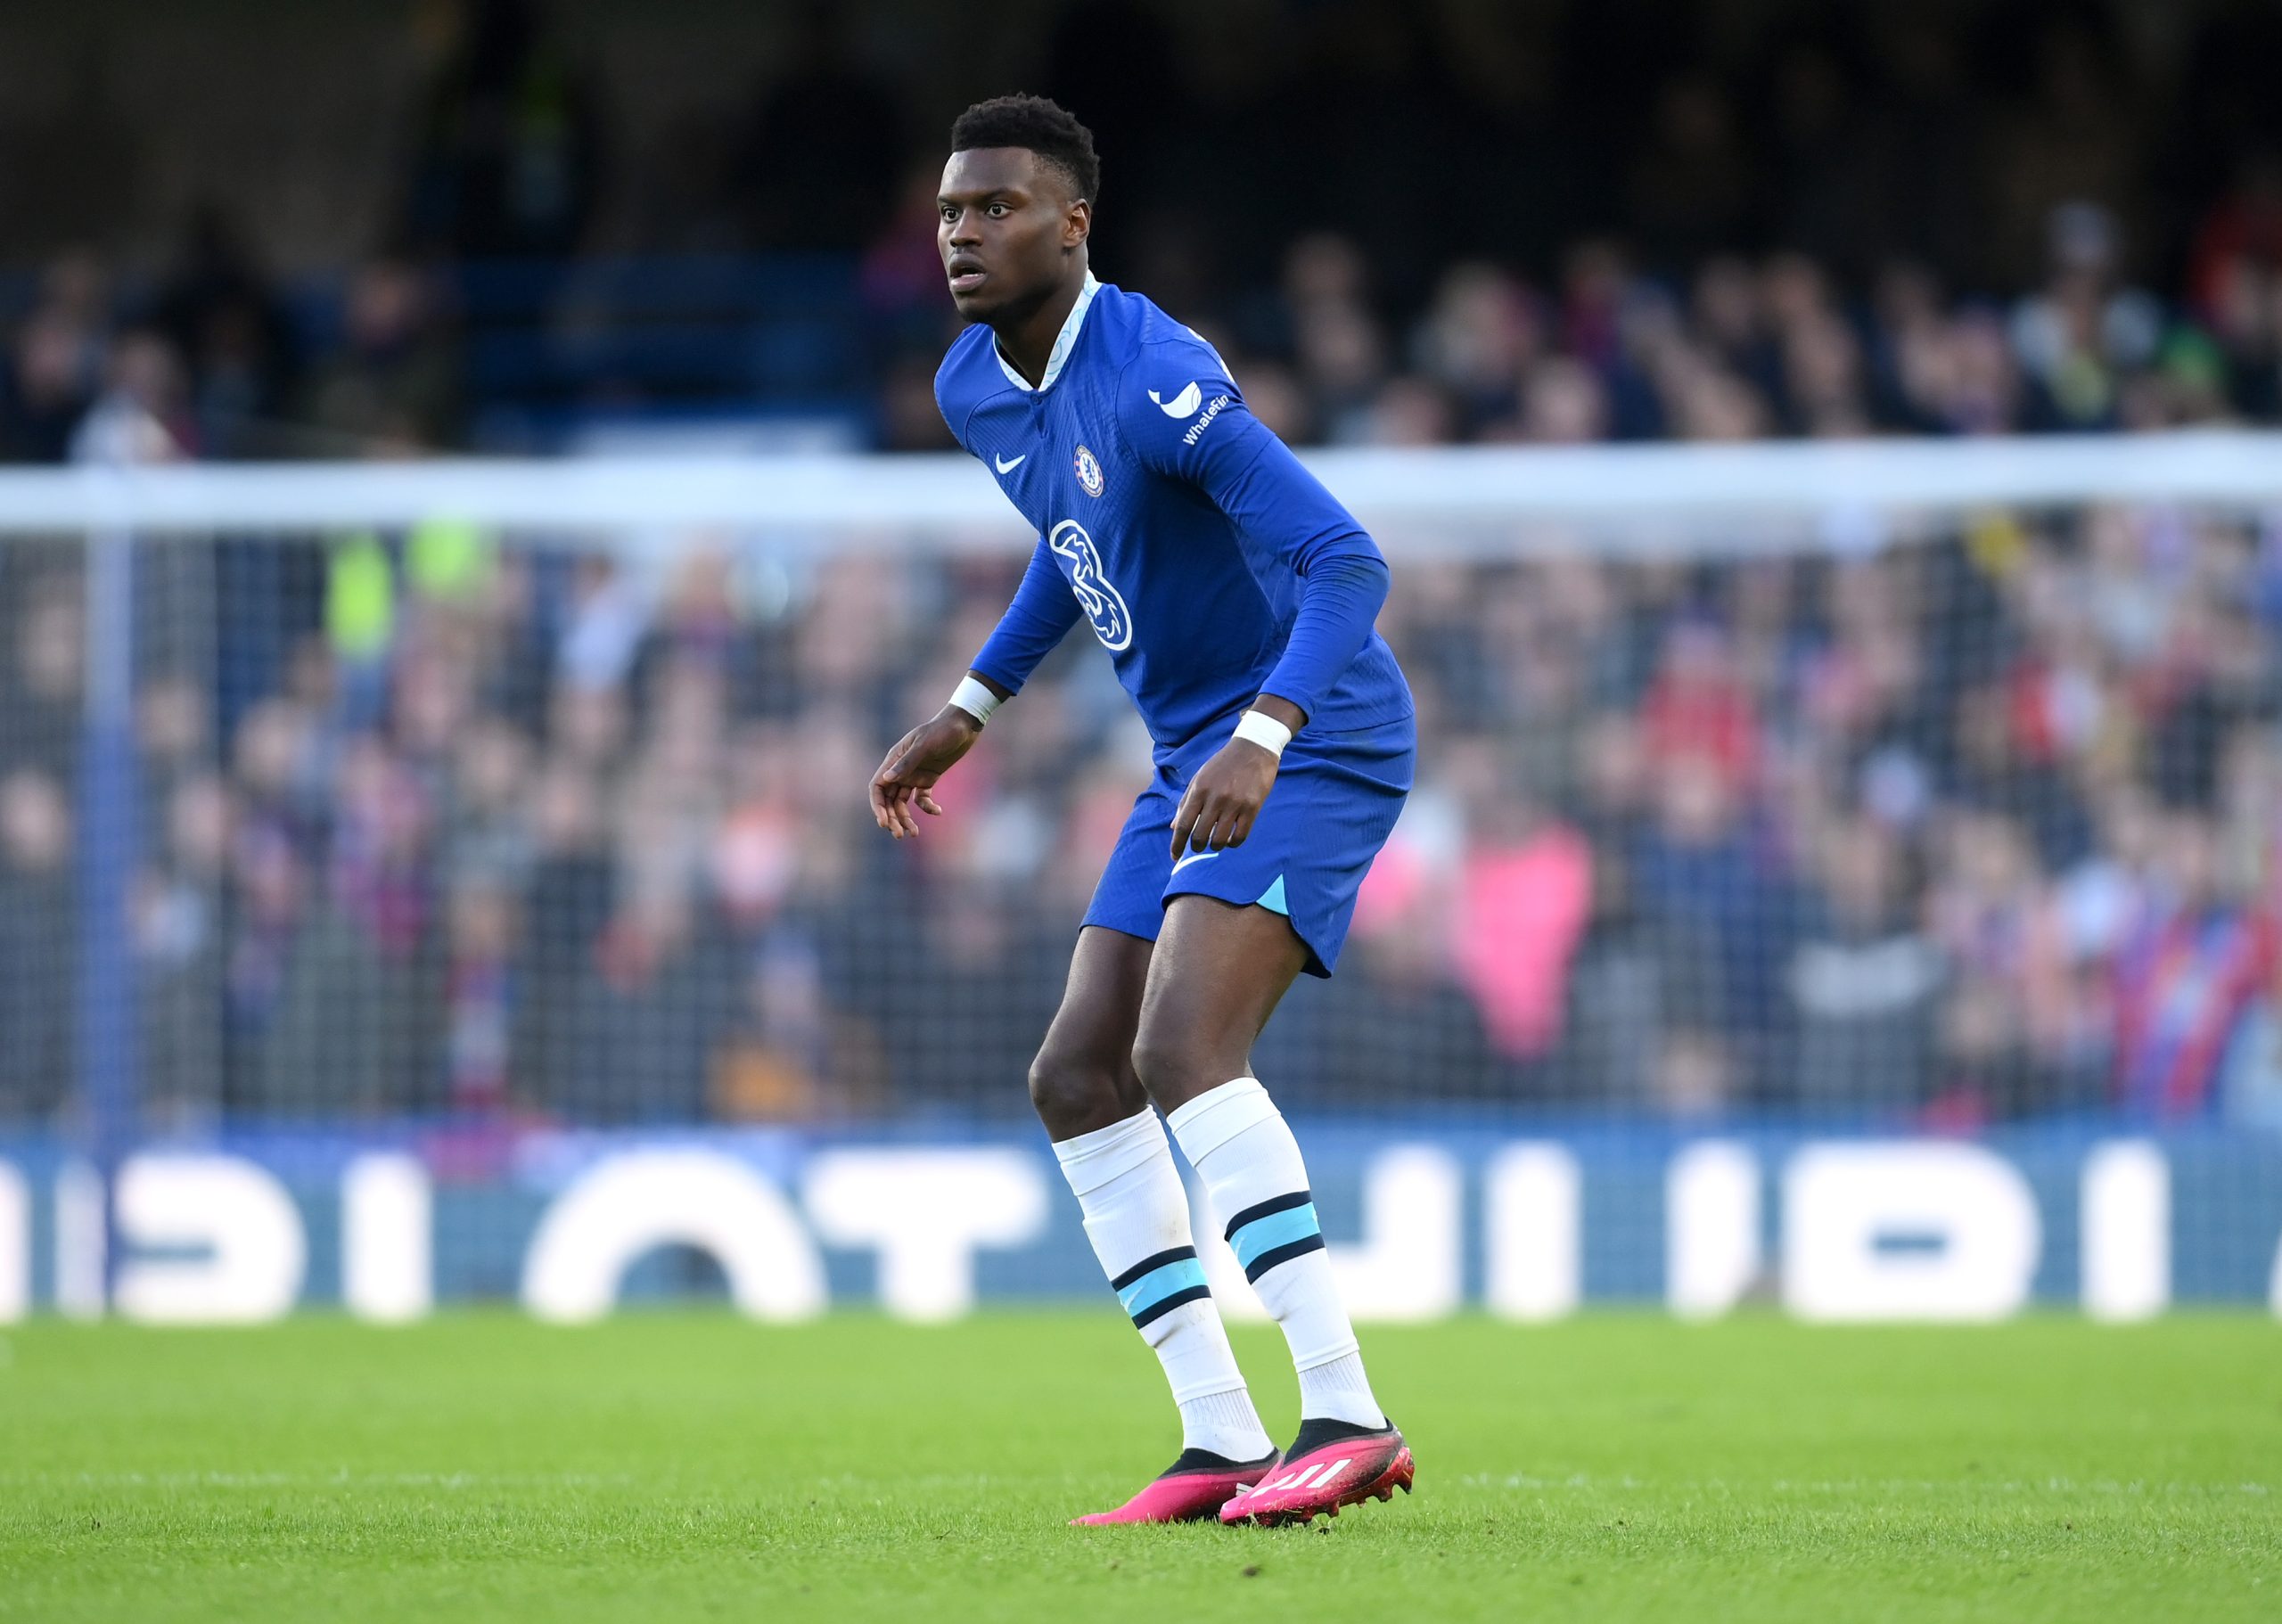 Chelsea confirm injured Benoit Badiashile will be ruled out for an extended period out.